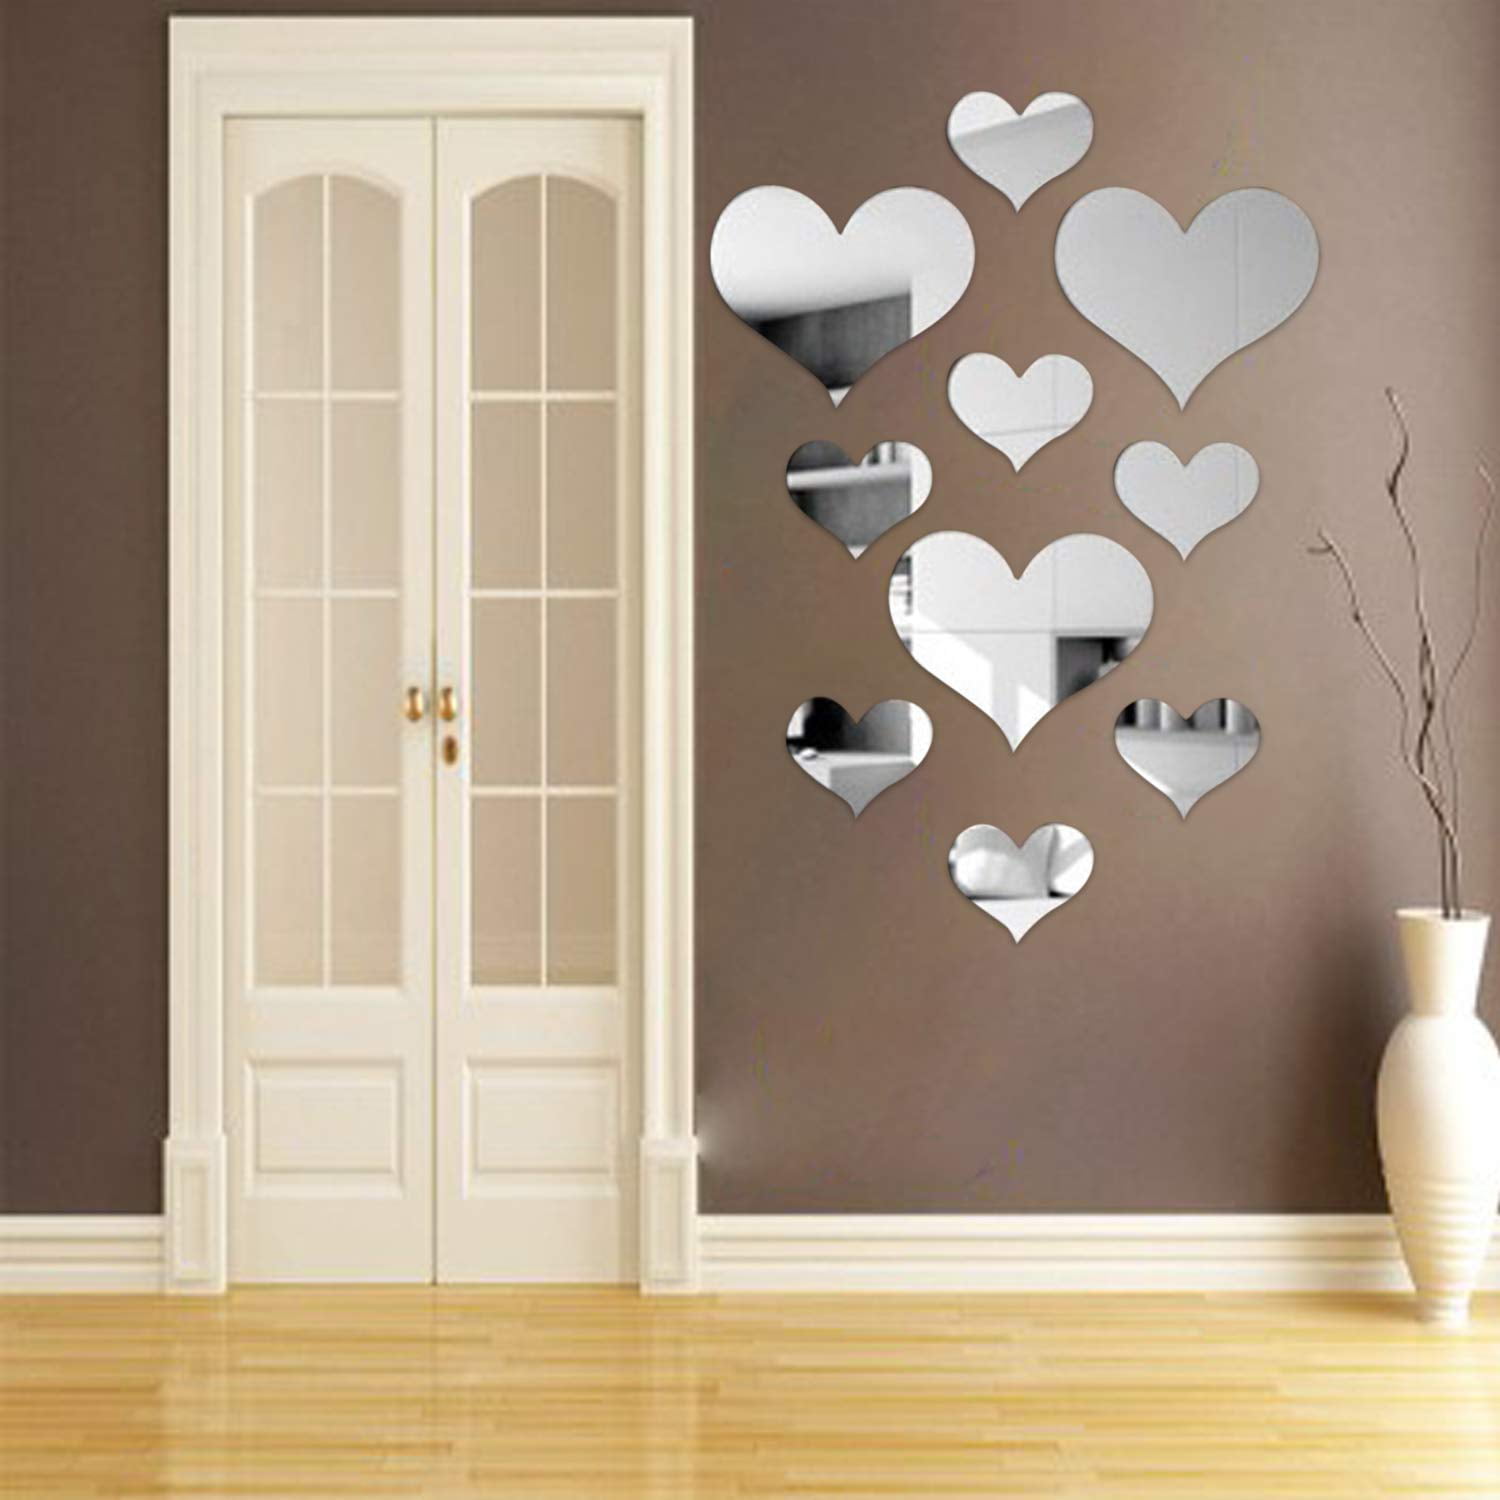 10pcs Love Heart Acrylic 3D Mirror Wall Sticker Mural Decal Removable Home Decor